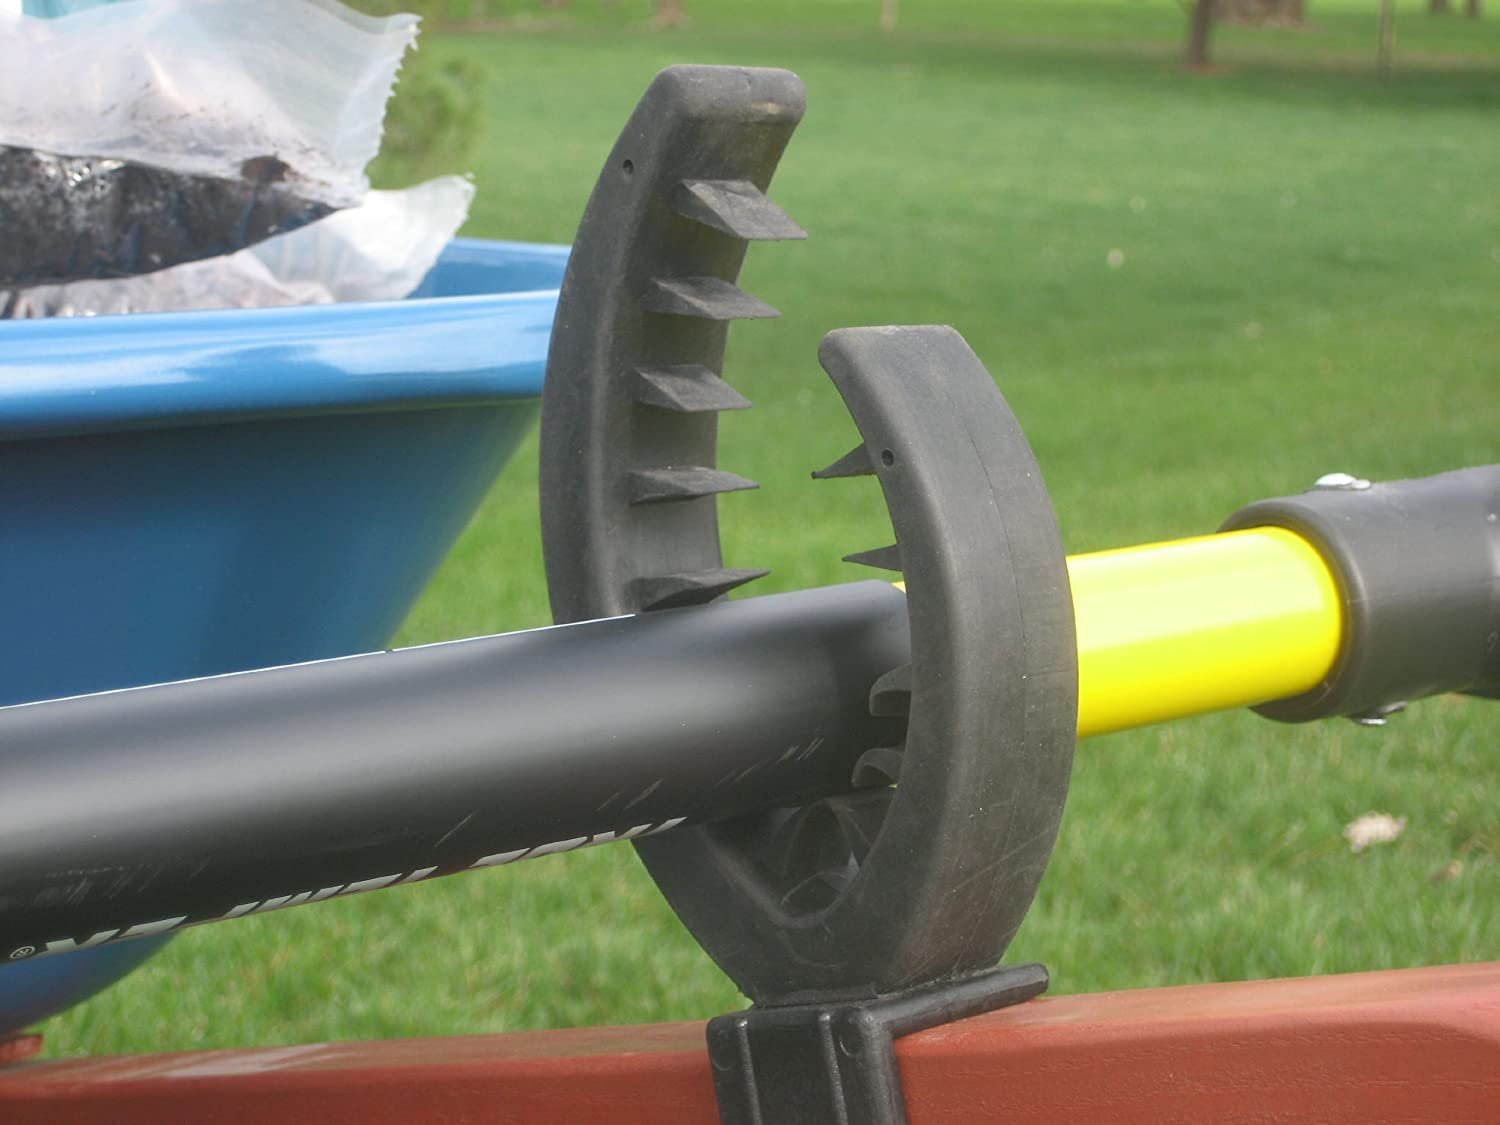 Grizzly Grip Wheelbarrow Tool Holder with Mesh Bag, Secures Tools To Wheelbarrow - image 4 of 5